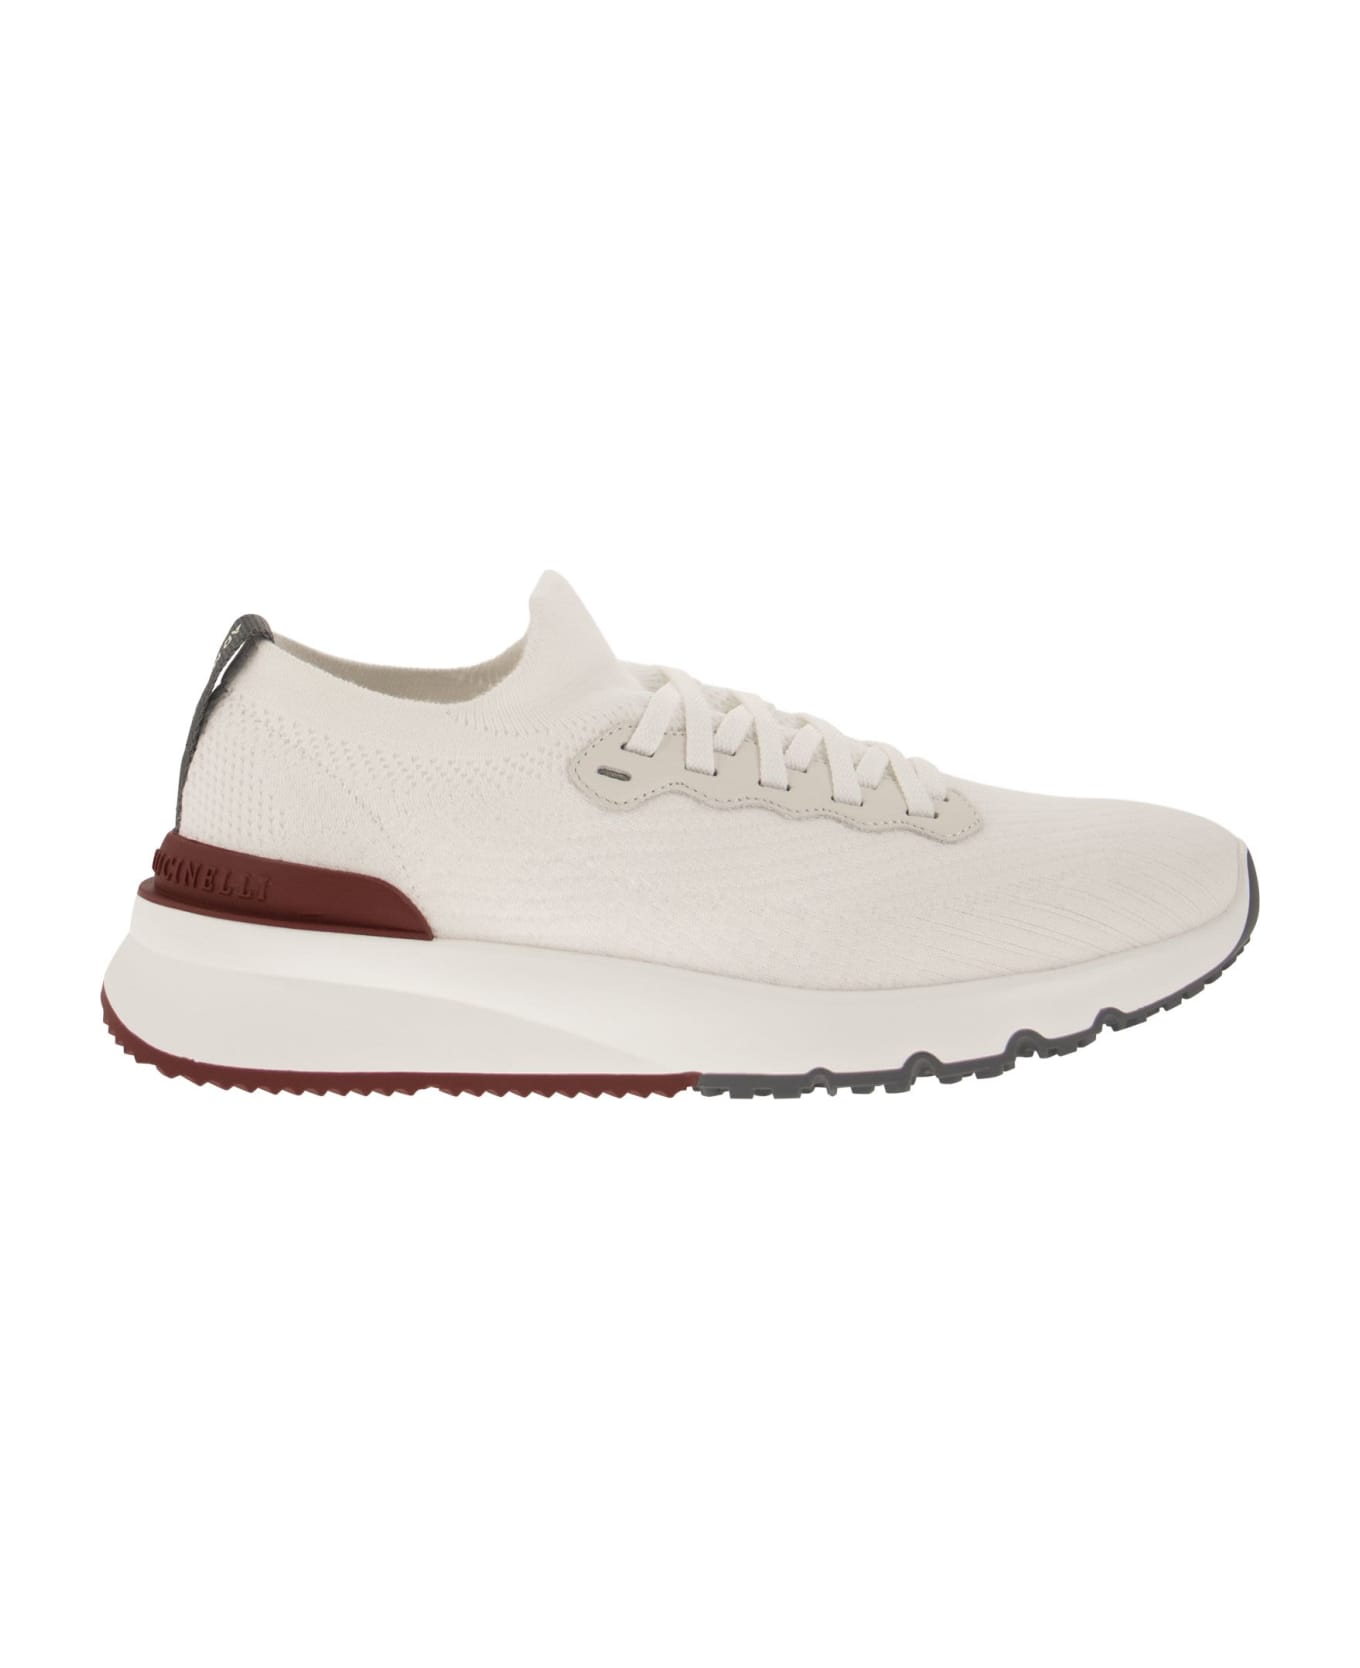 Brunello Cucinelli Runners In Cotton Knit And Semi-glossy Calf Leather - White